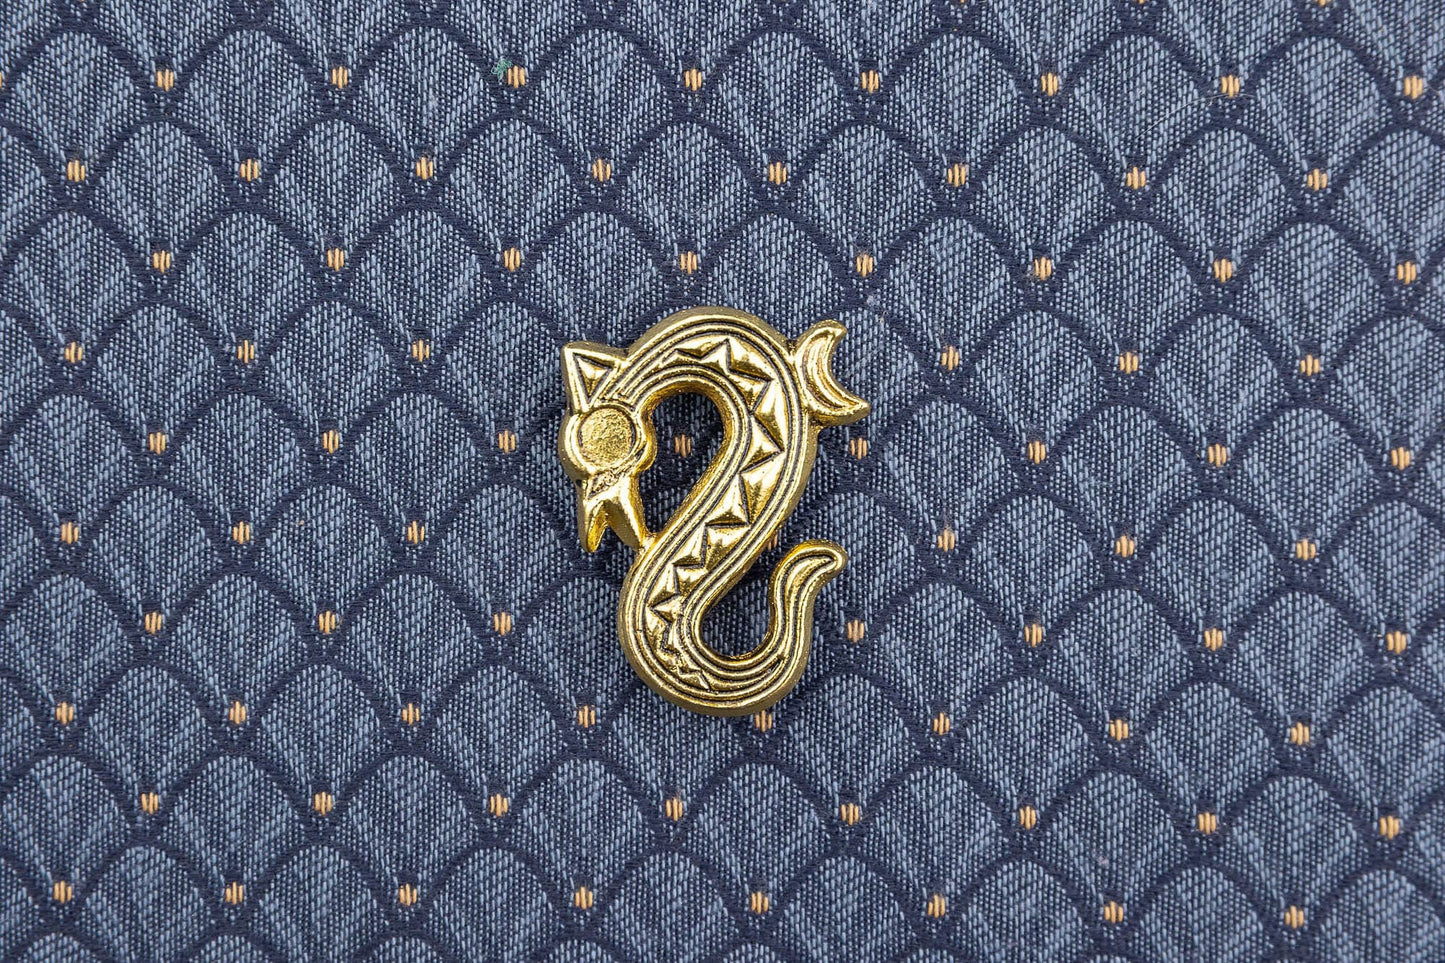 Frankish (French) Hippocampus Mount/Brooch